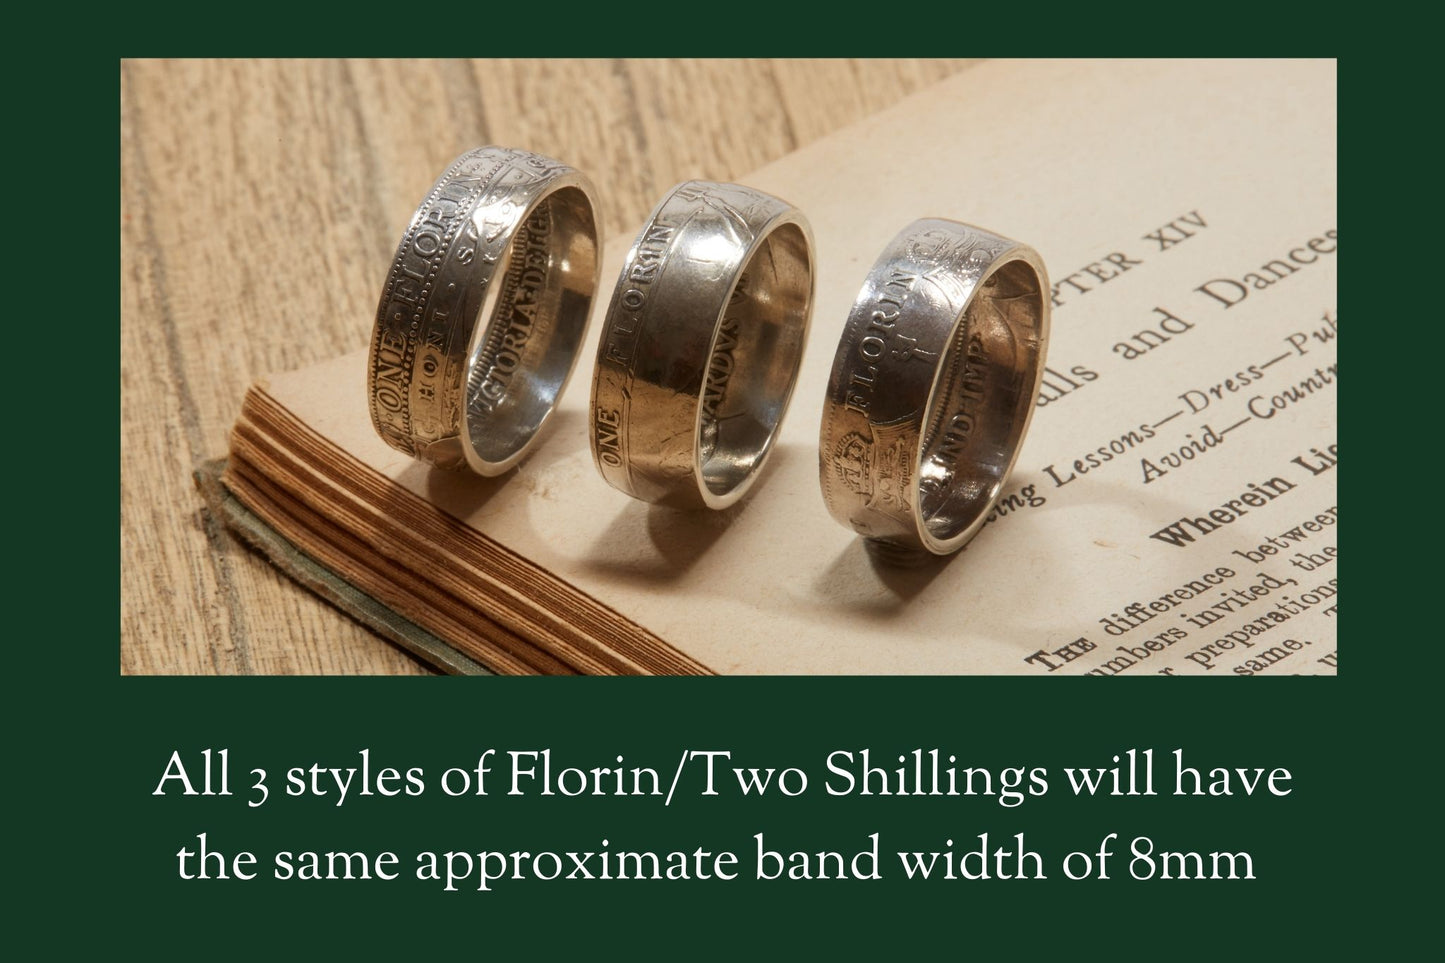 3 x florin coin rings together on book